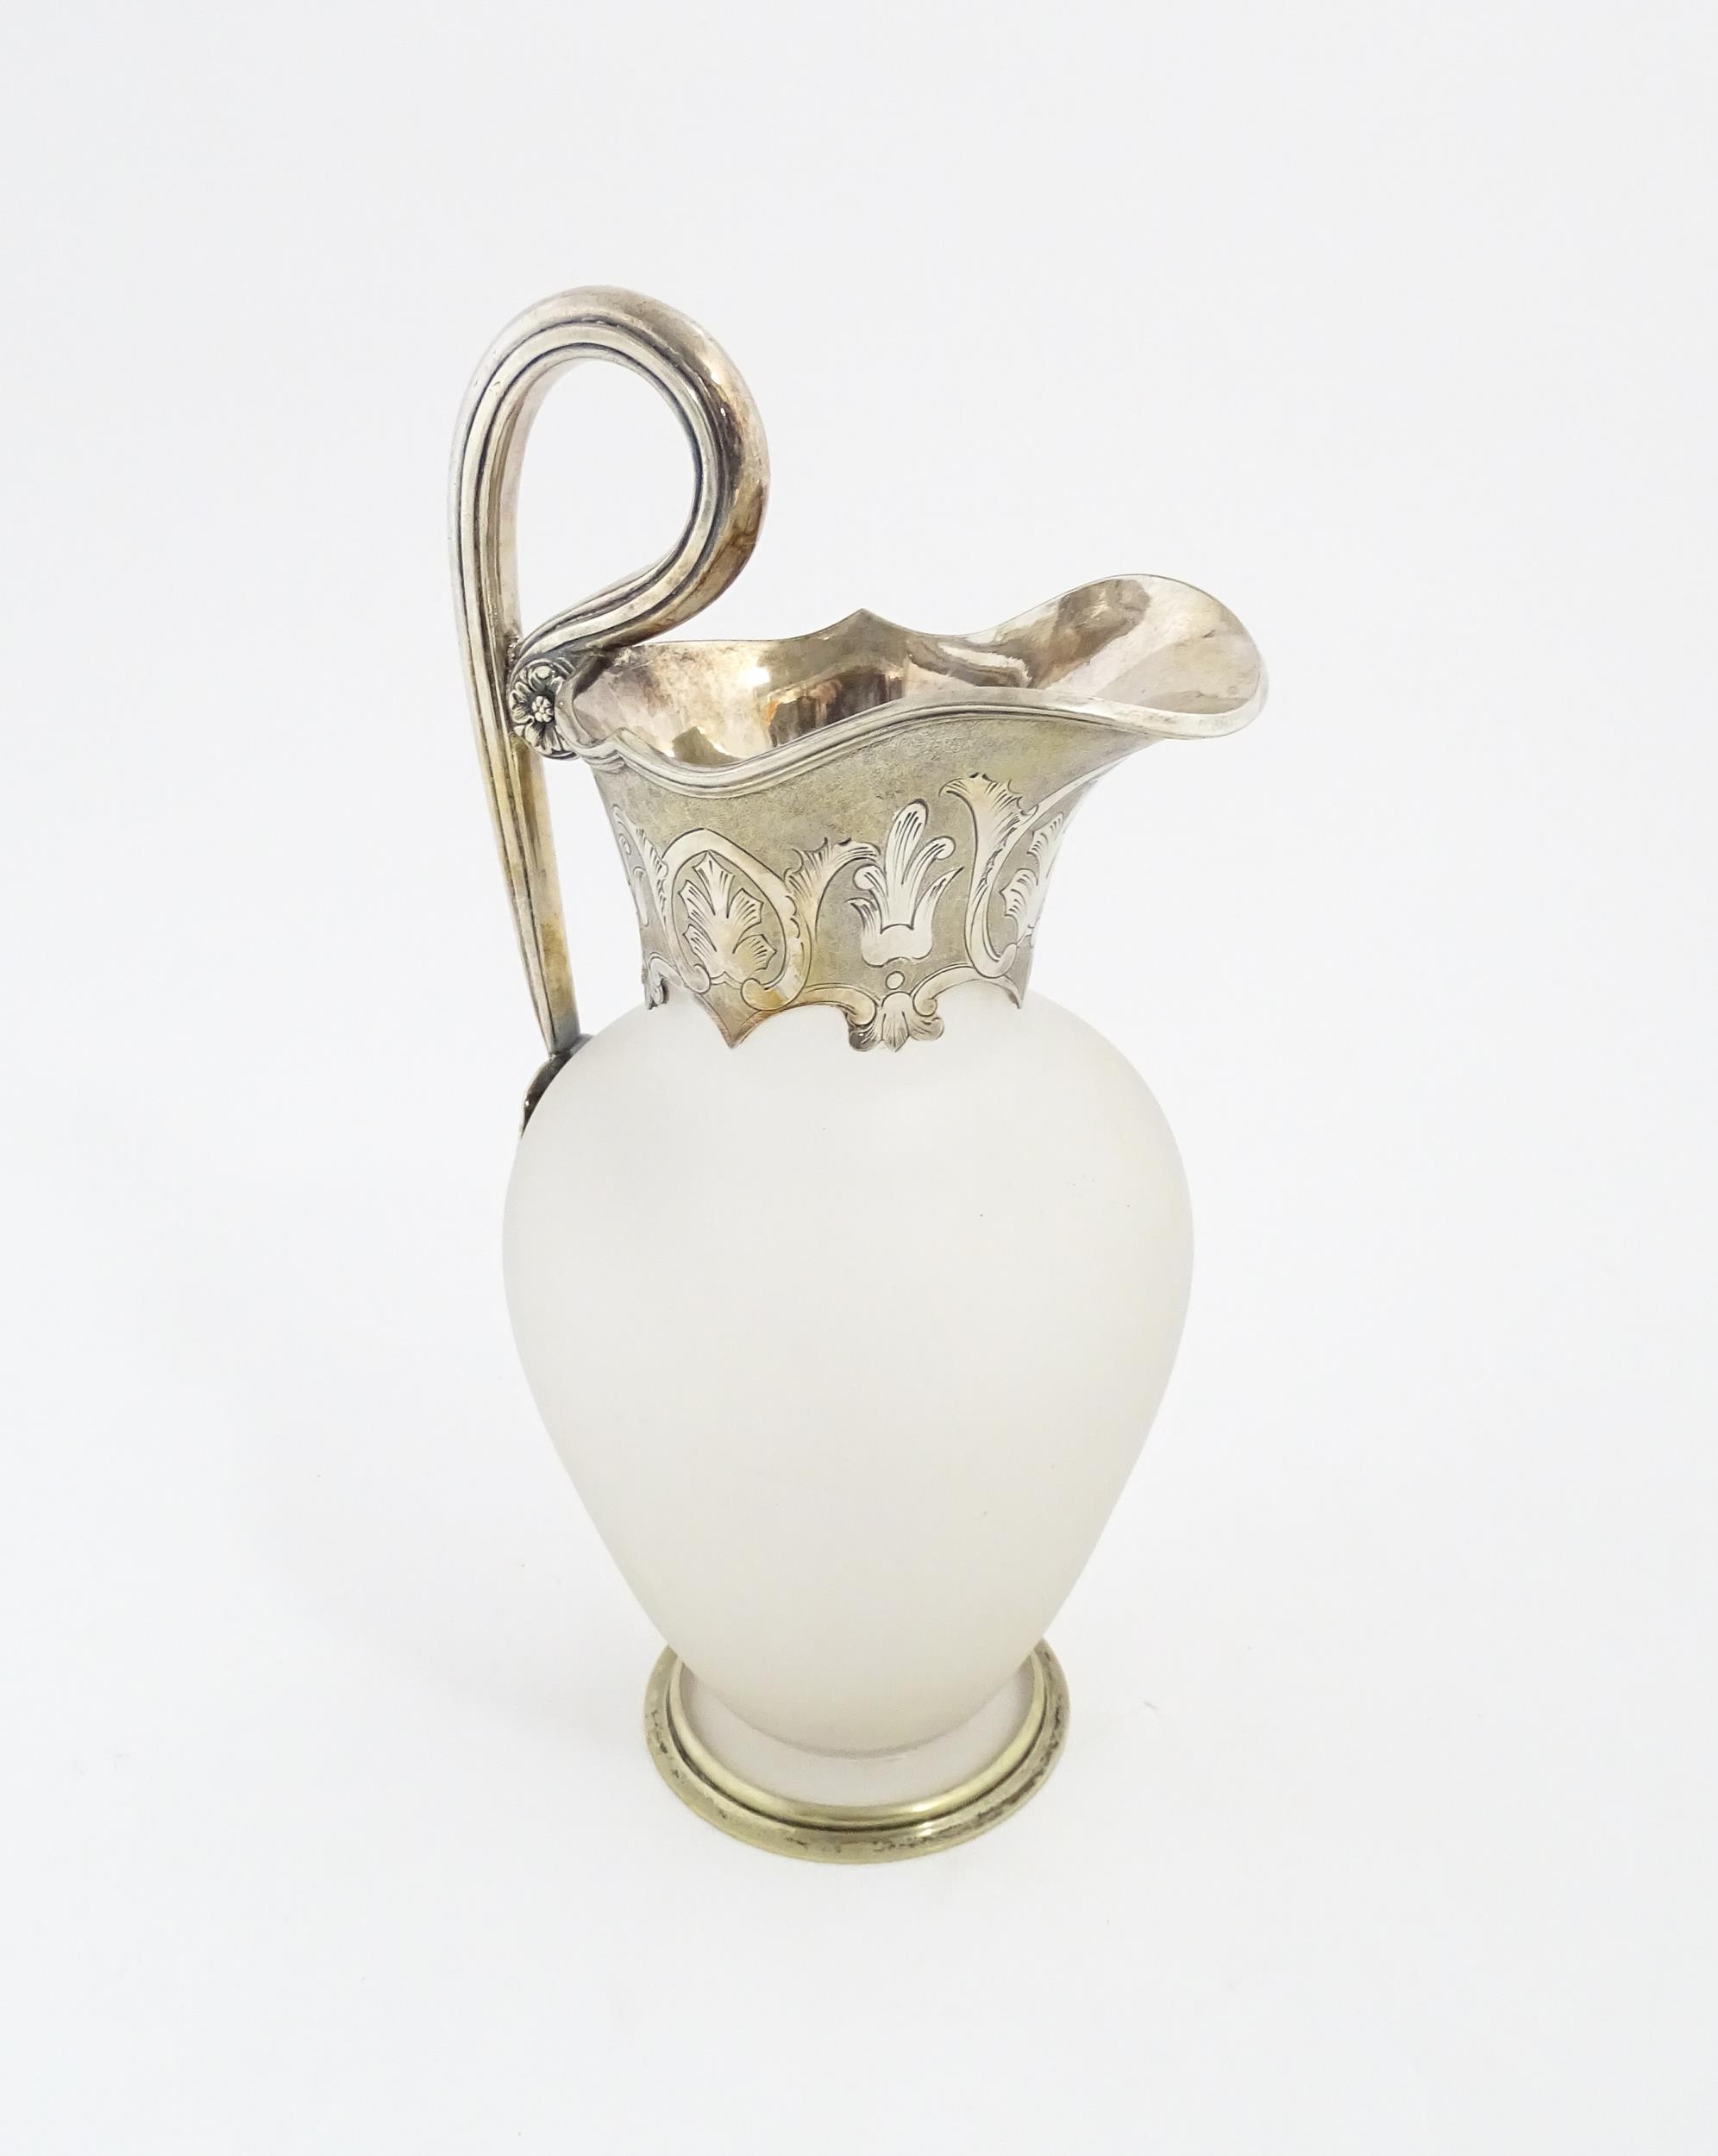 A Victorian frosted glass jug of ewer form with silver plate handle and mounts. Approx. 11 1/2" high - Image 4 of 6